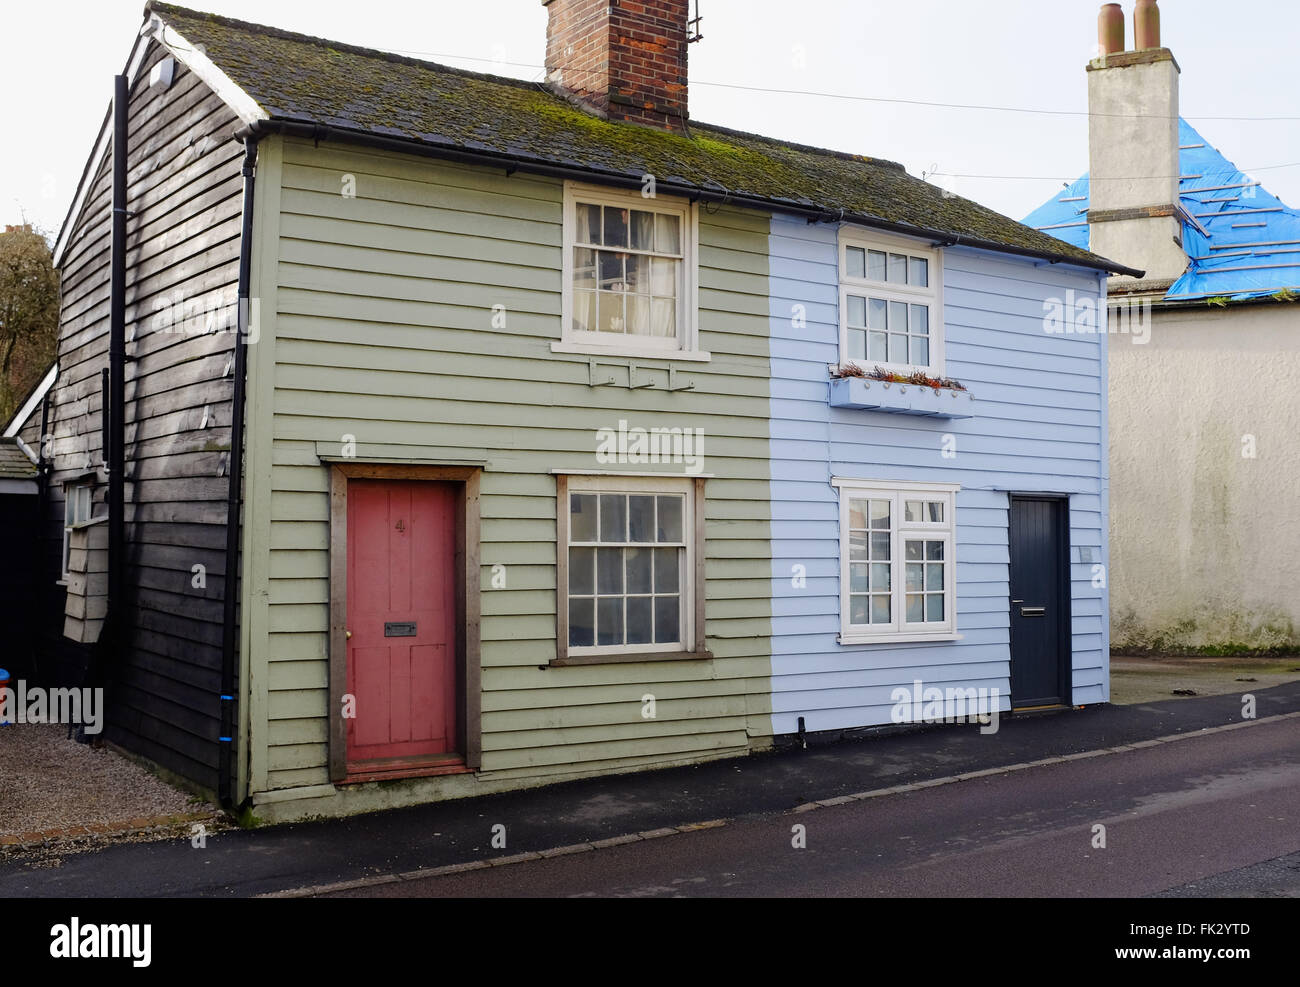 Billericay Essex UK - Typical old historic wood paneled terraced houses Stock Photo